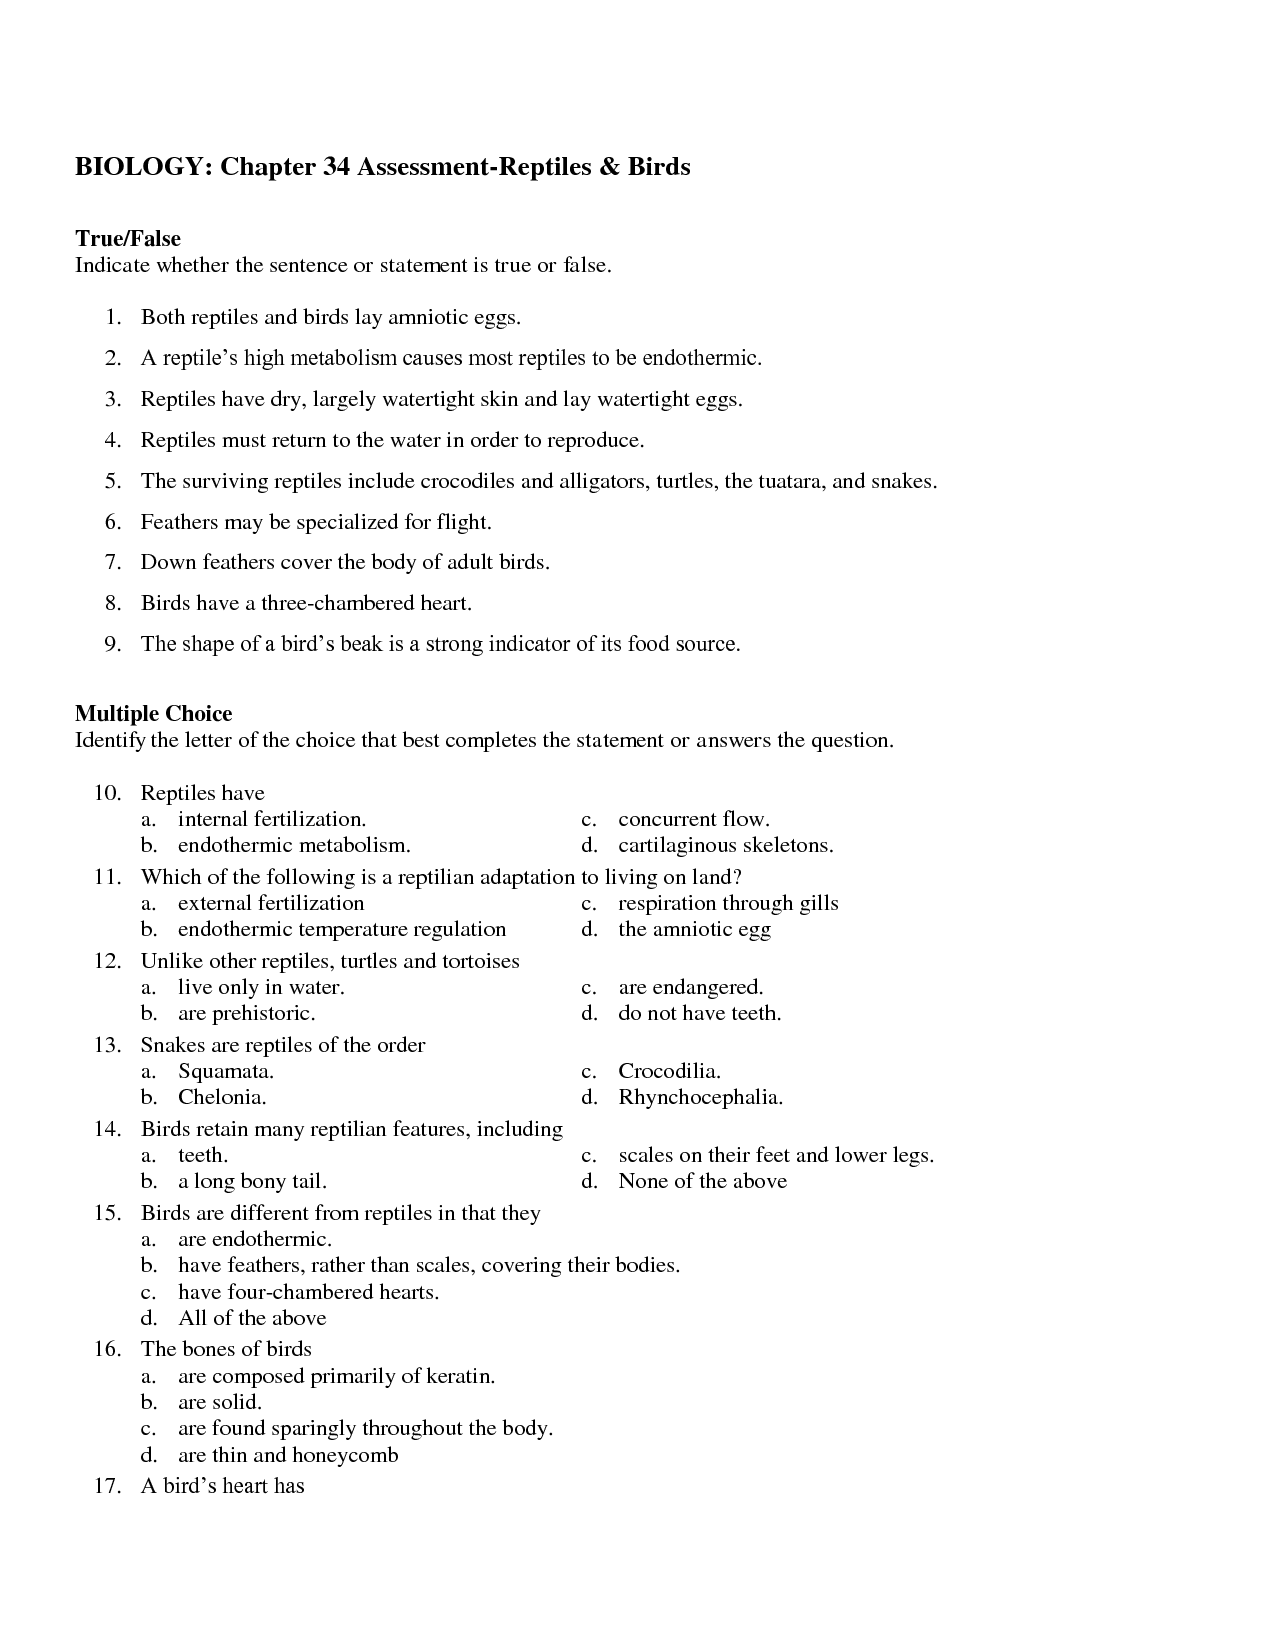 14 Best Images of DNA And Genes Chapter 11 Worksheet Unit 4 - Chapter